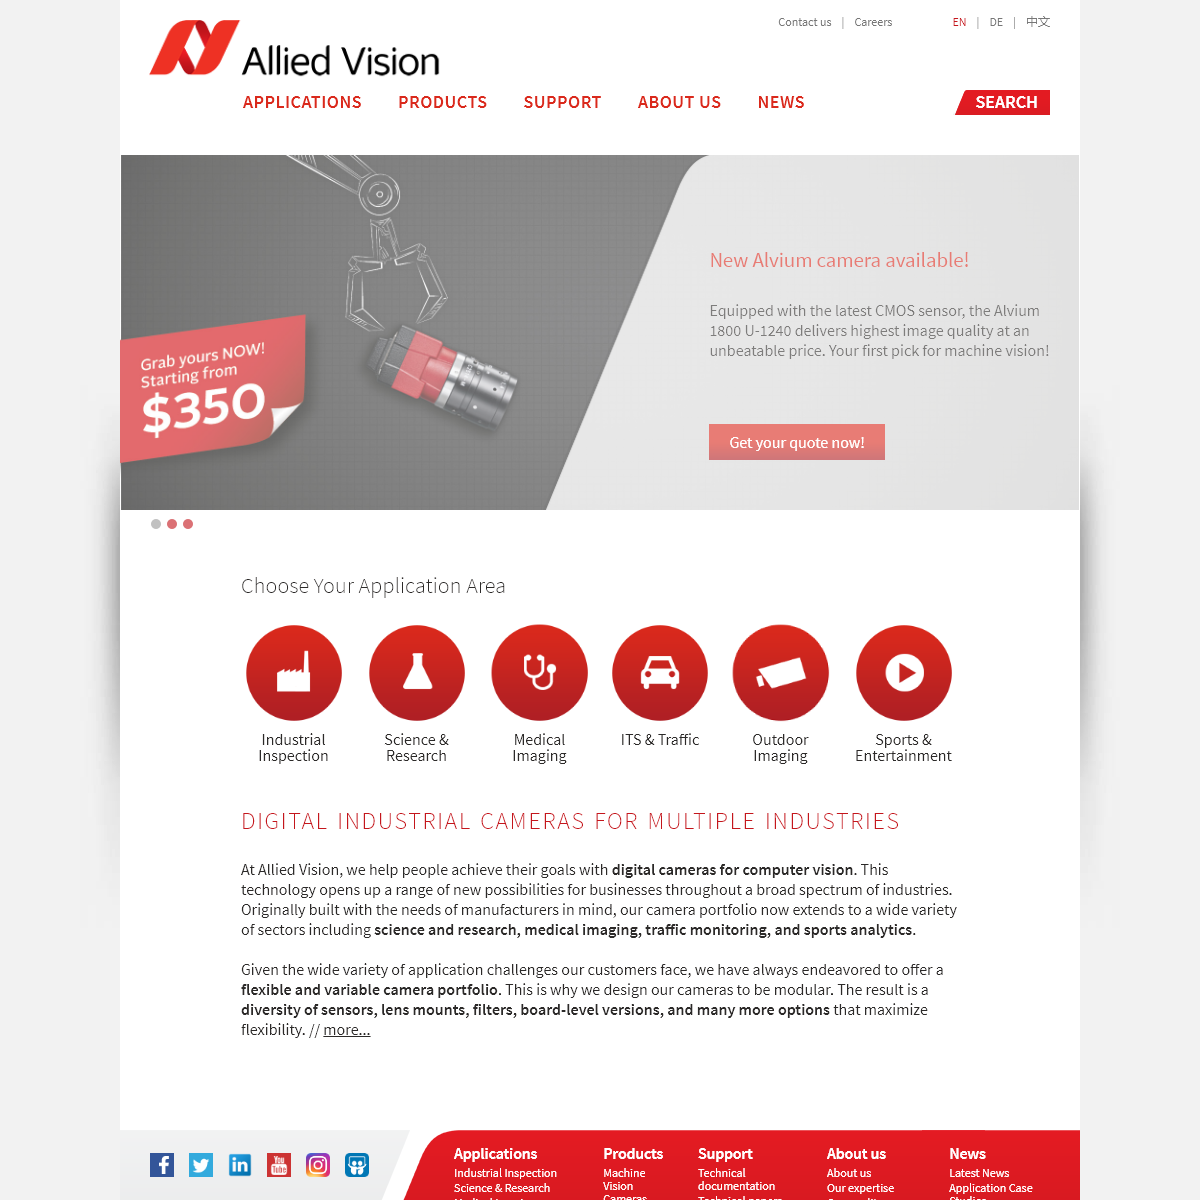 A complete backup of alliedvision.com